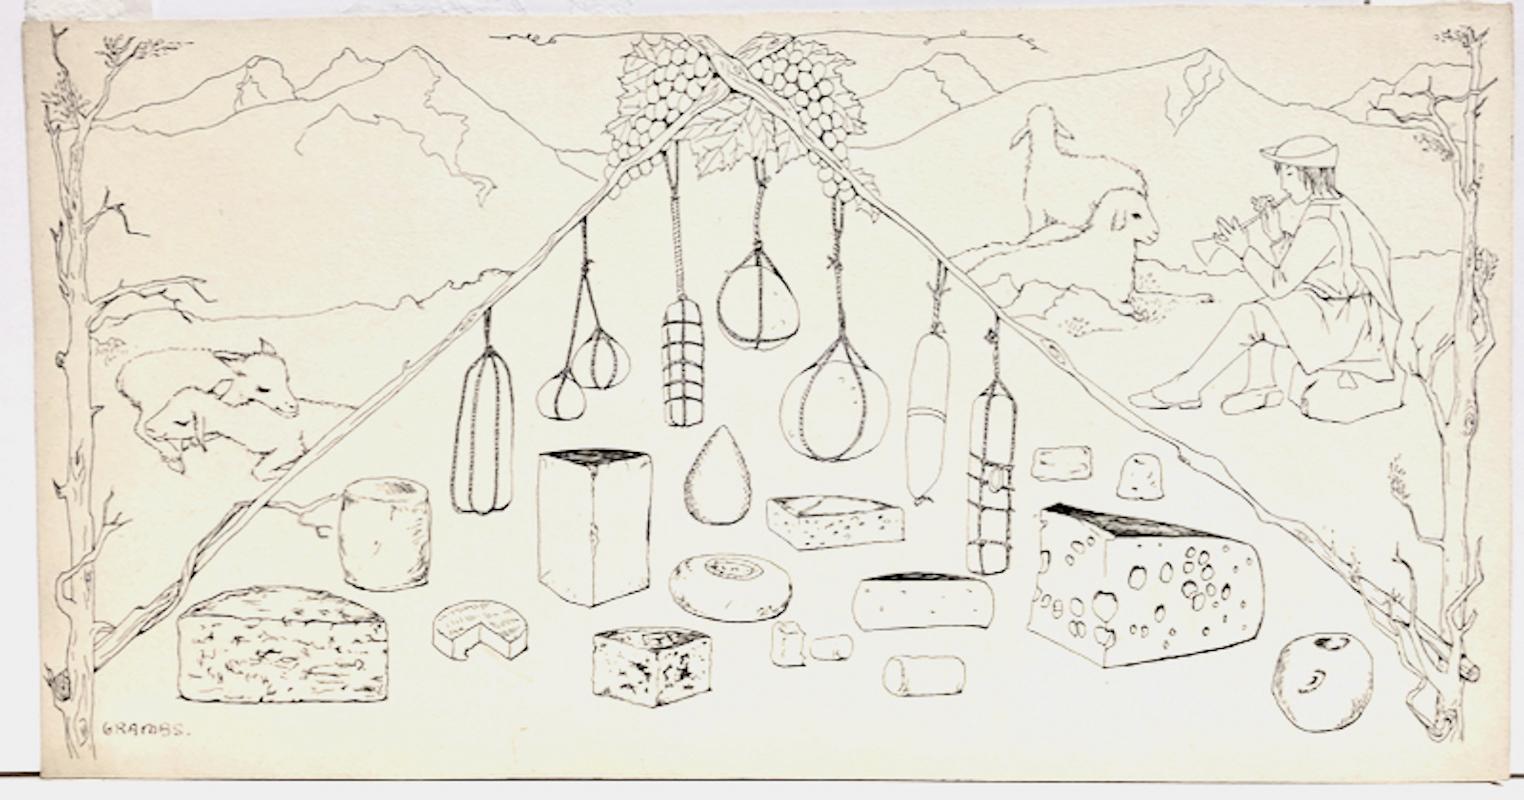 In the 1950s and 60s Grambs worked on many commissions. 

This ink drawing of many kinds of cheese (mostly Italian I would say) and the idyllic landscape from which it would have come, was for a Conde Nast publication. Their red ink stamp is on the